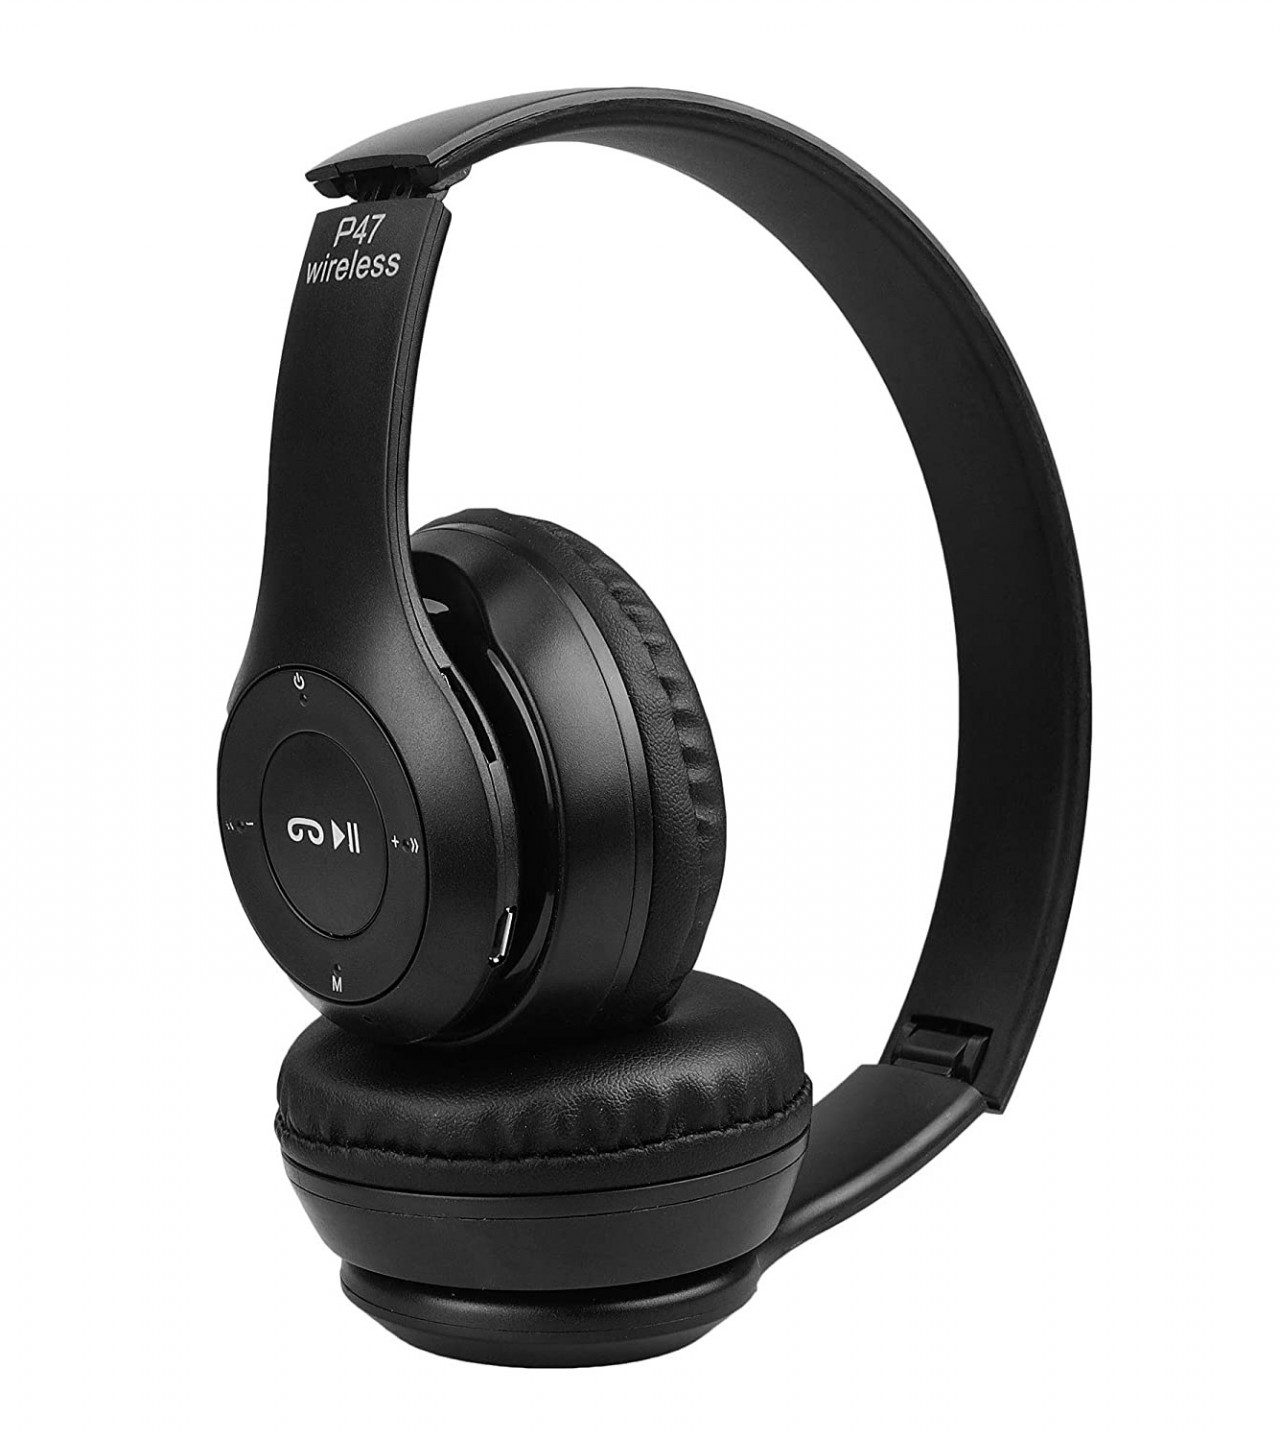 MTR P47 Wireless Bluetooth Headphone,Memory Card Support,Fm Radio Enabled and Big Battery (Black)